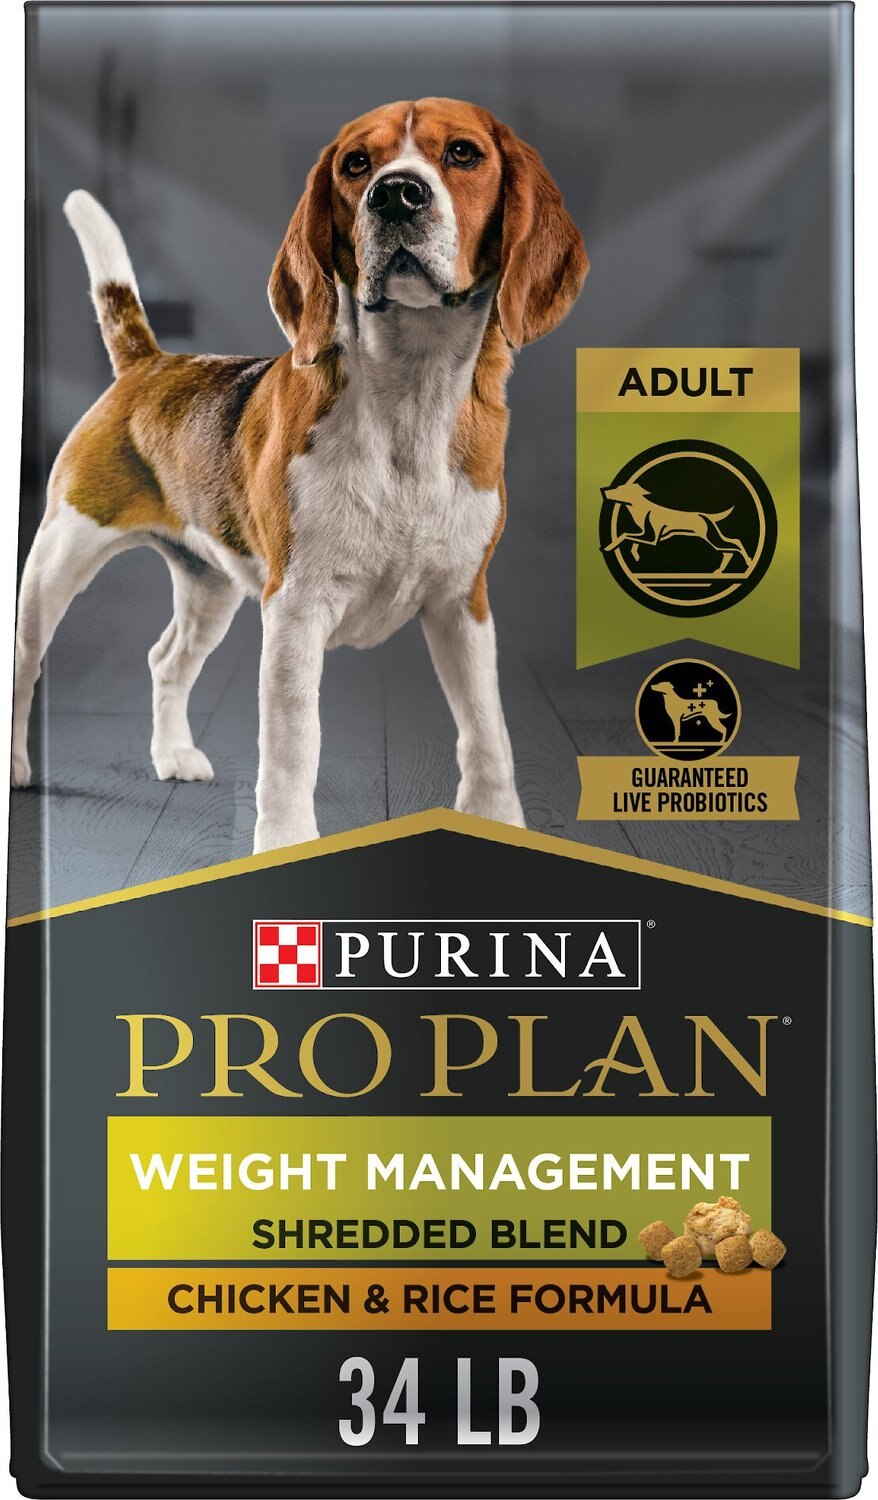 Purina Pro Plan Adult Weight Management